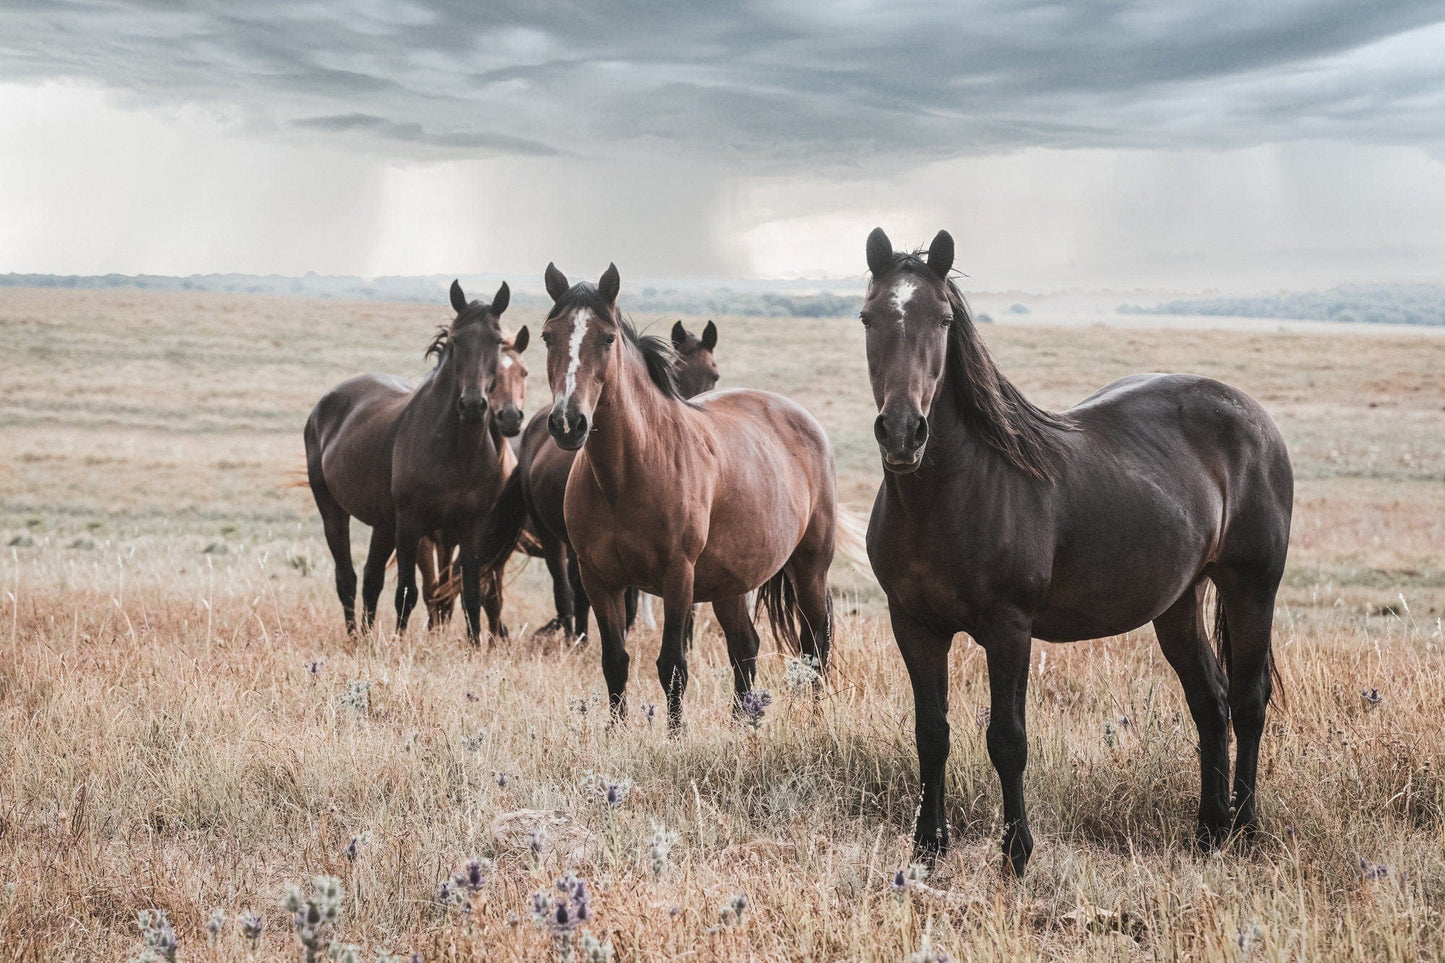 Wild Horses and Stormy Sky Wall Decor Paper Photo Print / 12 x 18 Inches Wall Art Teri James Photography